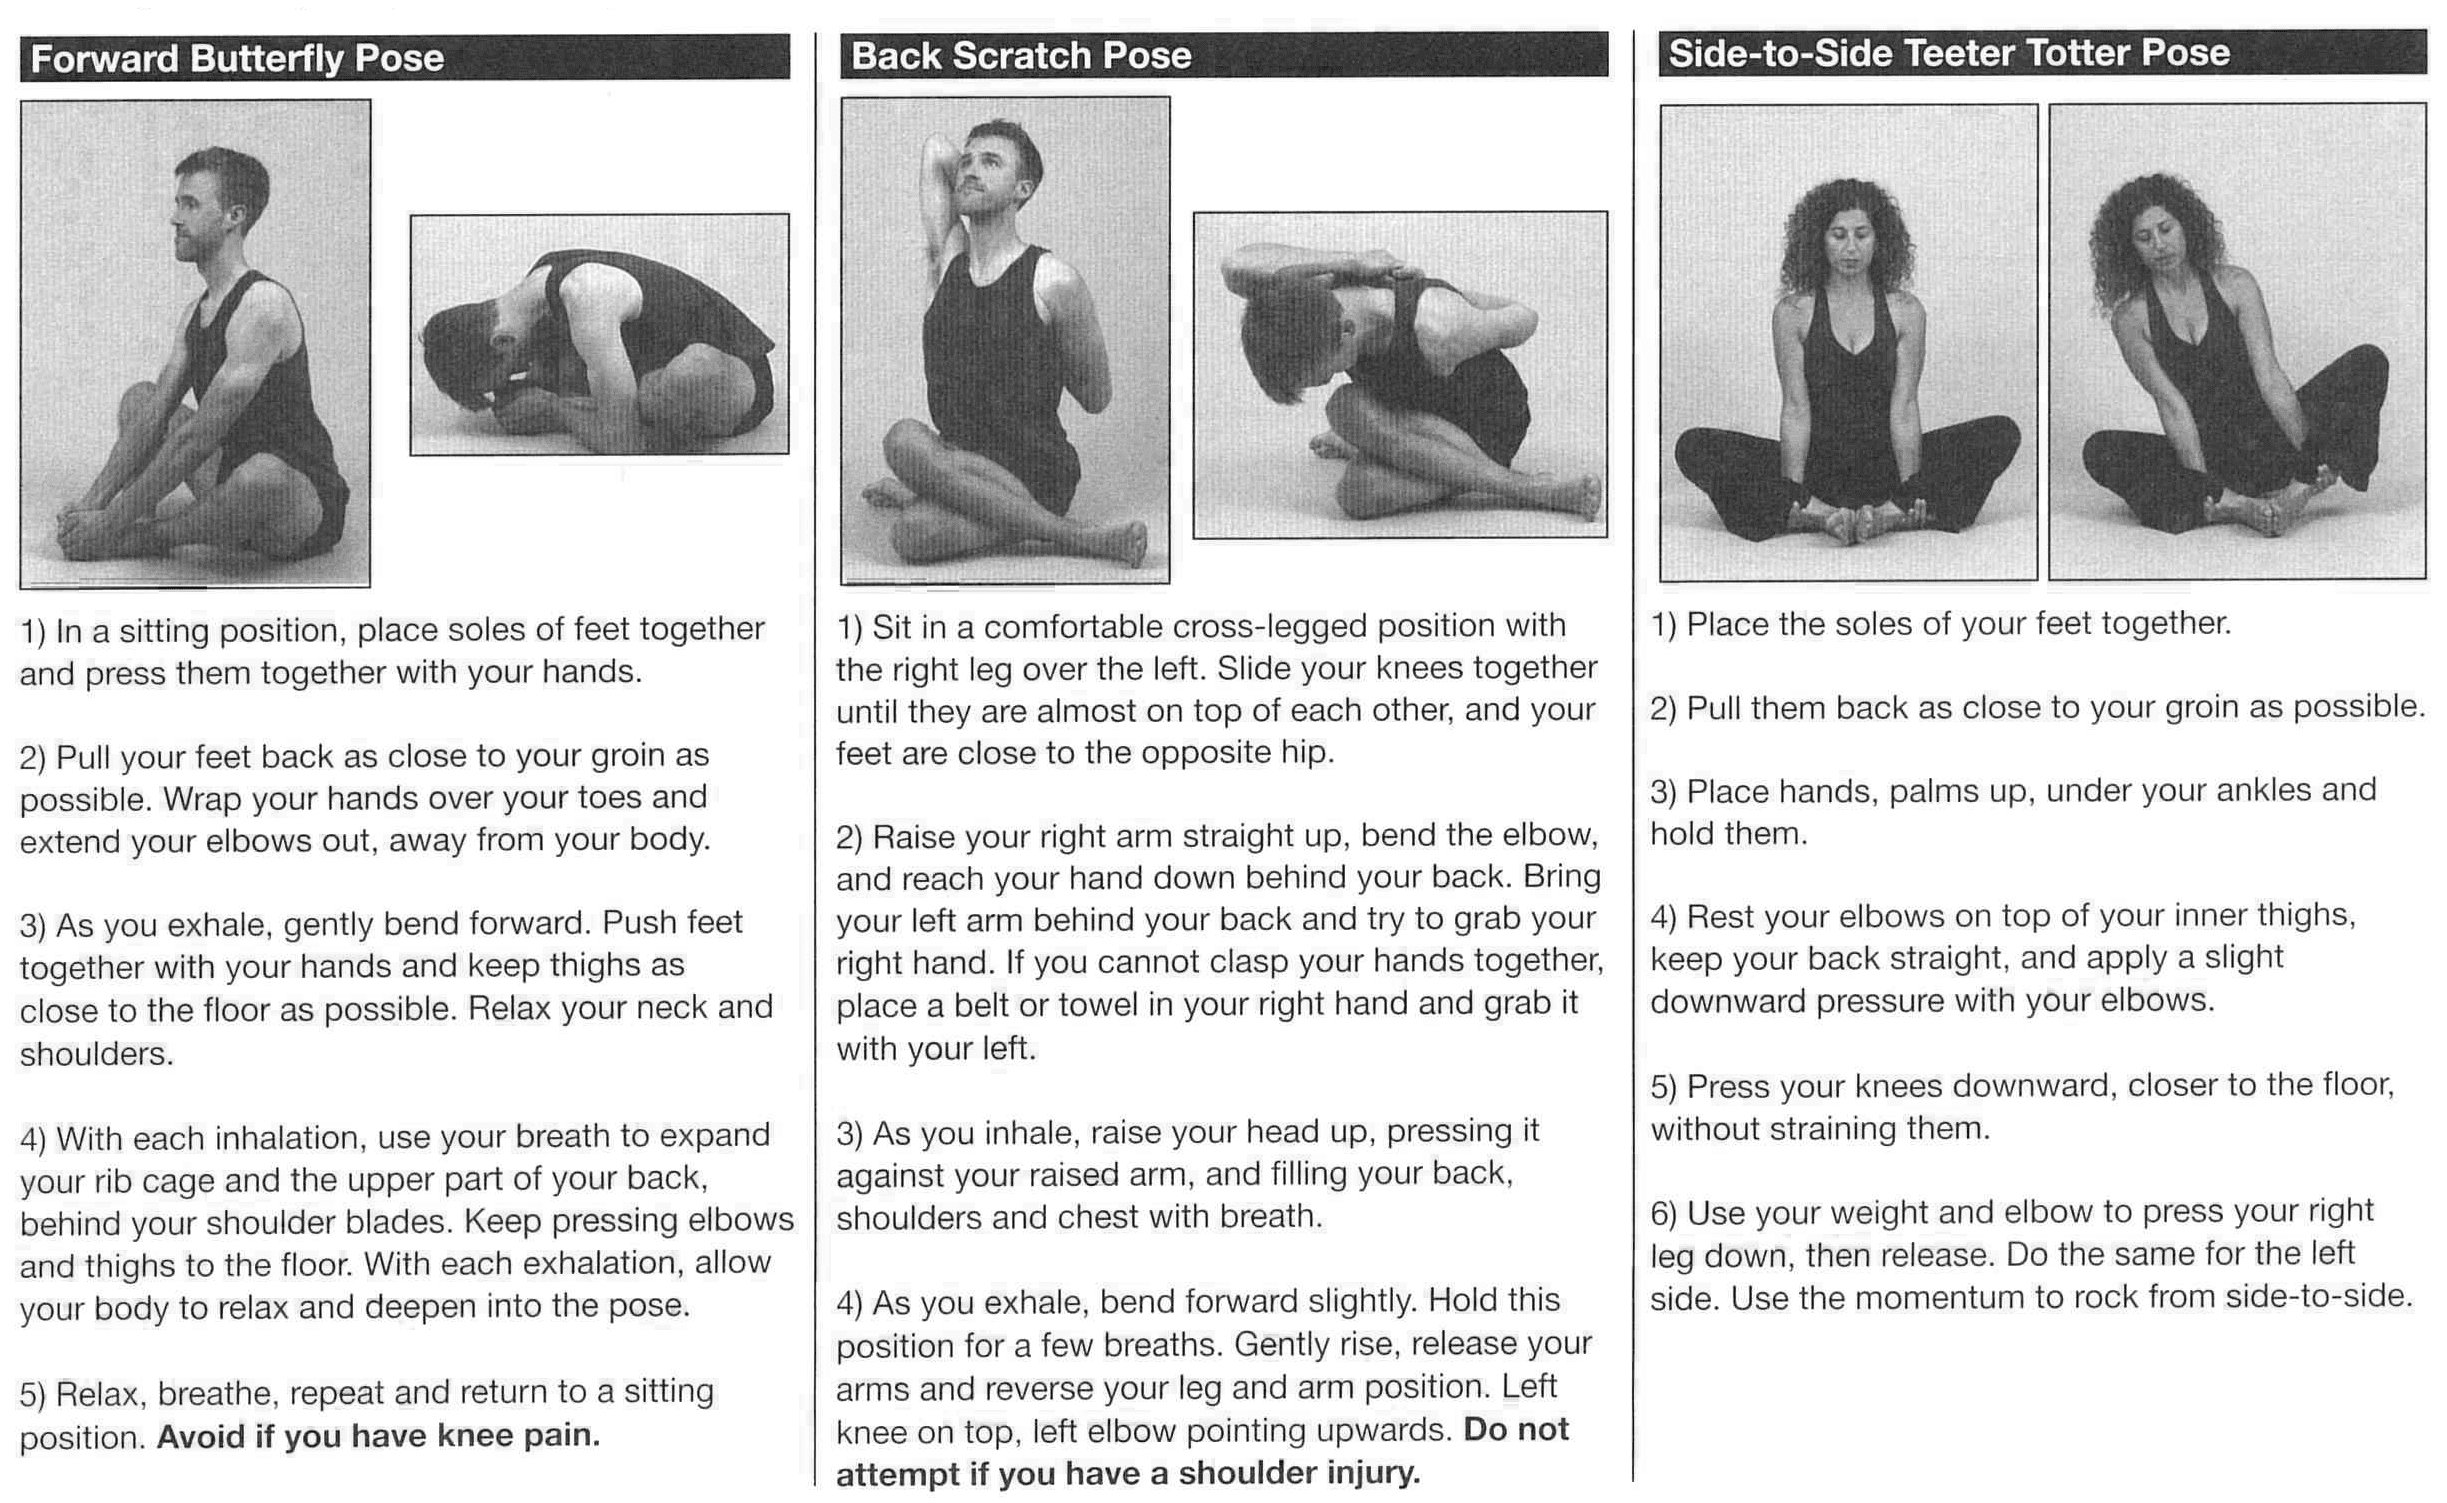 Diagram and instructions for forward butterfly pose, back scratch pose, and side-to-side teeter totter pose